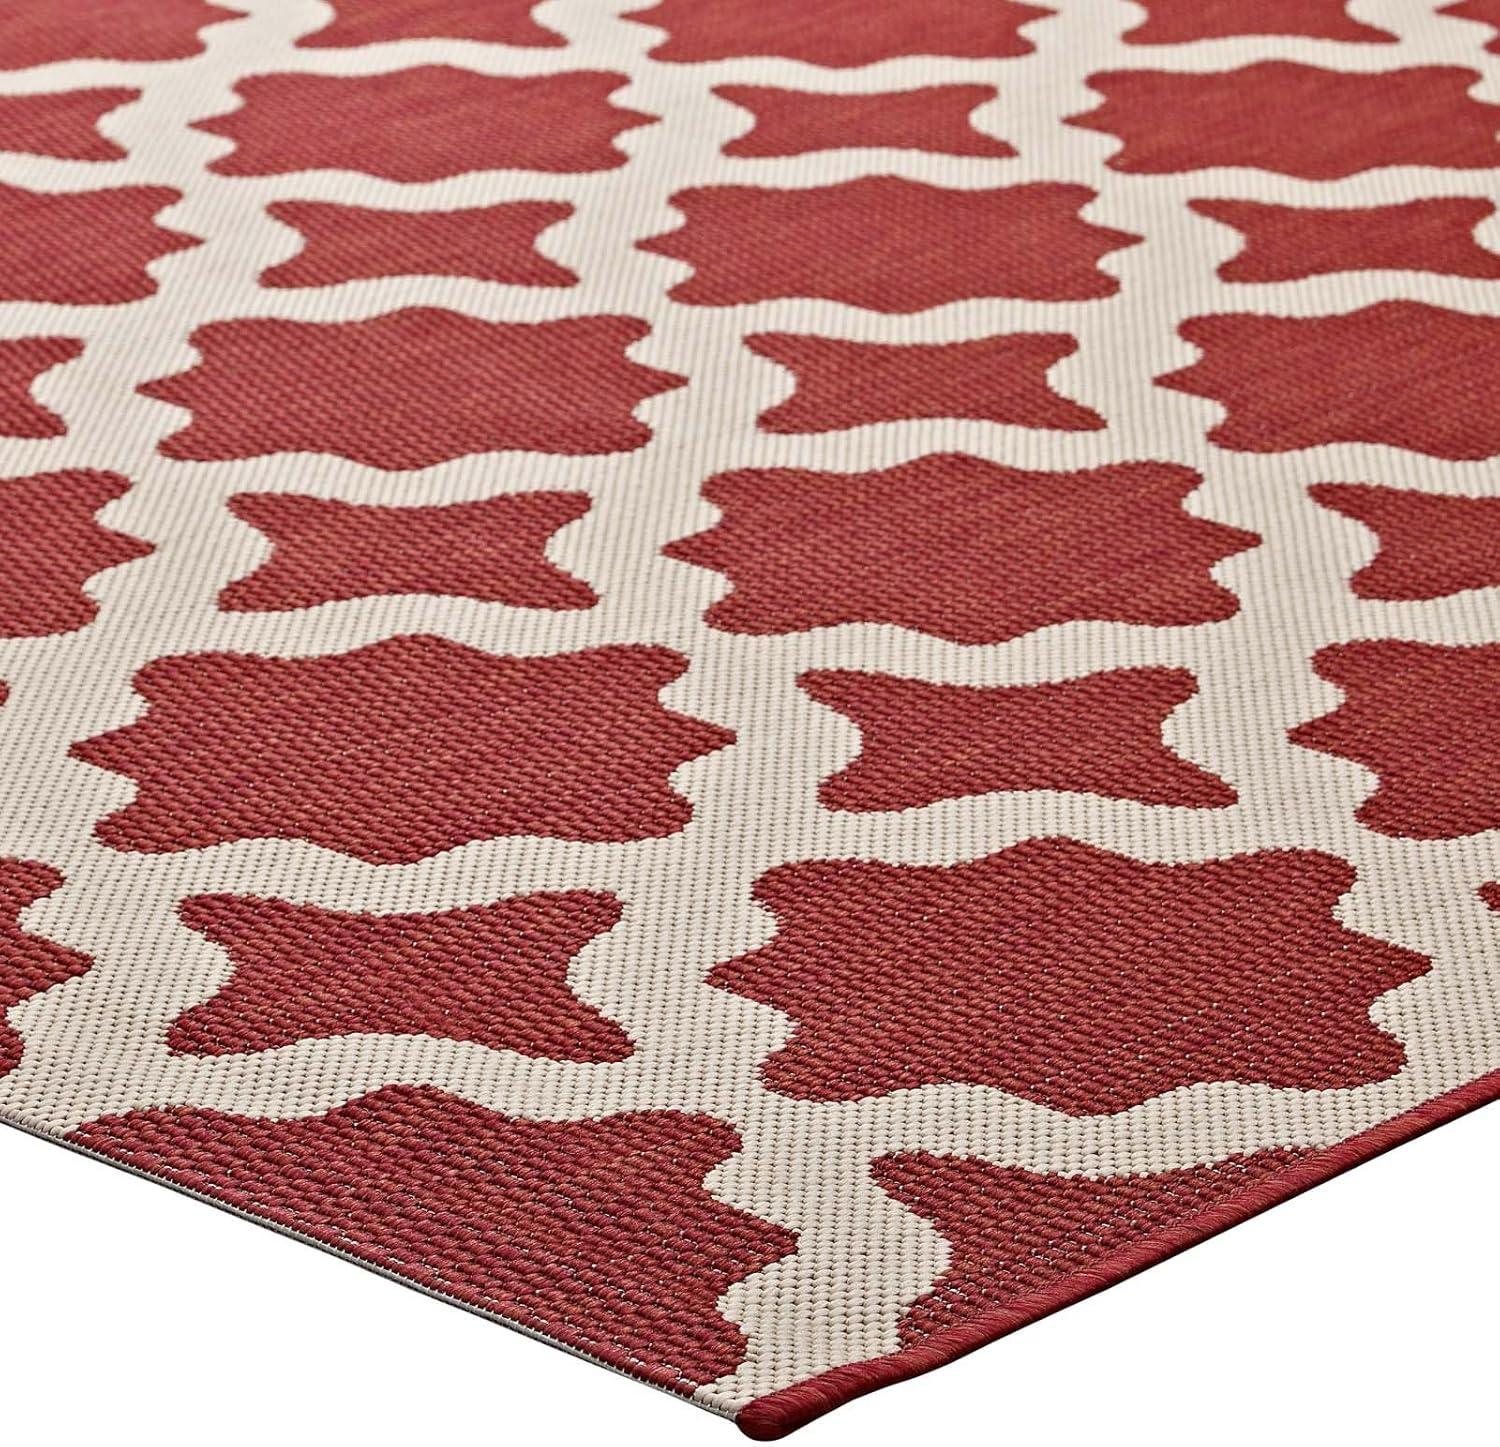 Cerelia Moroccan Trellis 5' x 8' Red and Beige Synthetic Area Rug